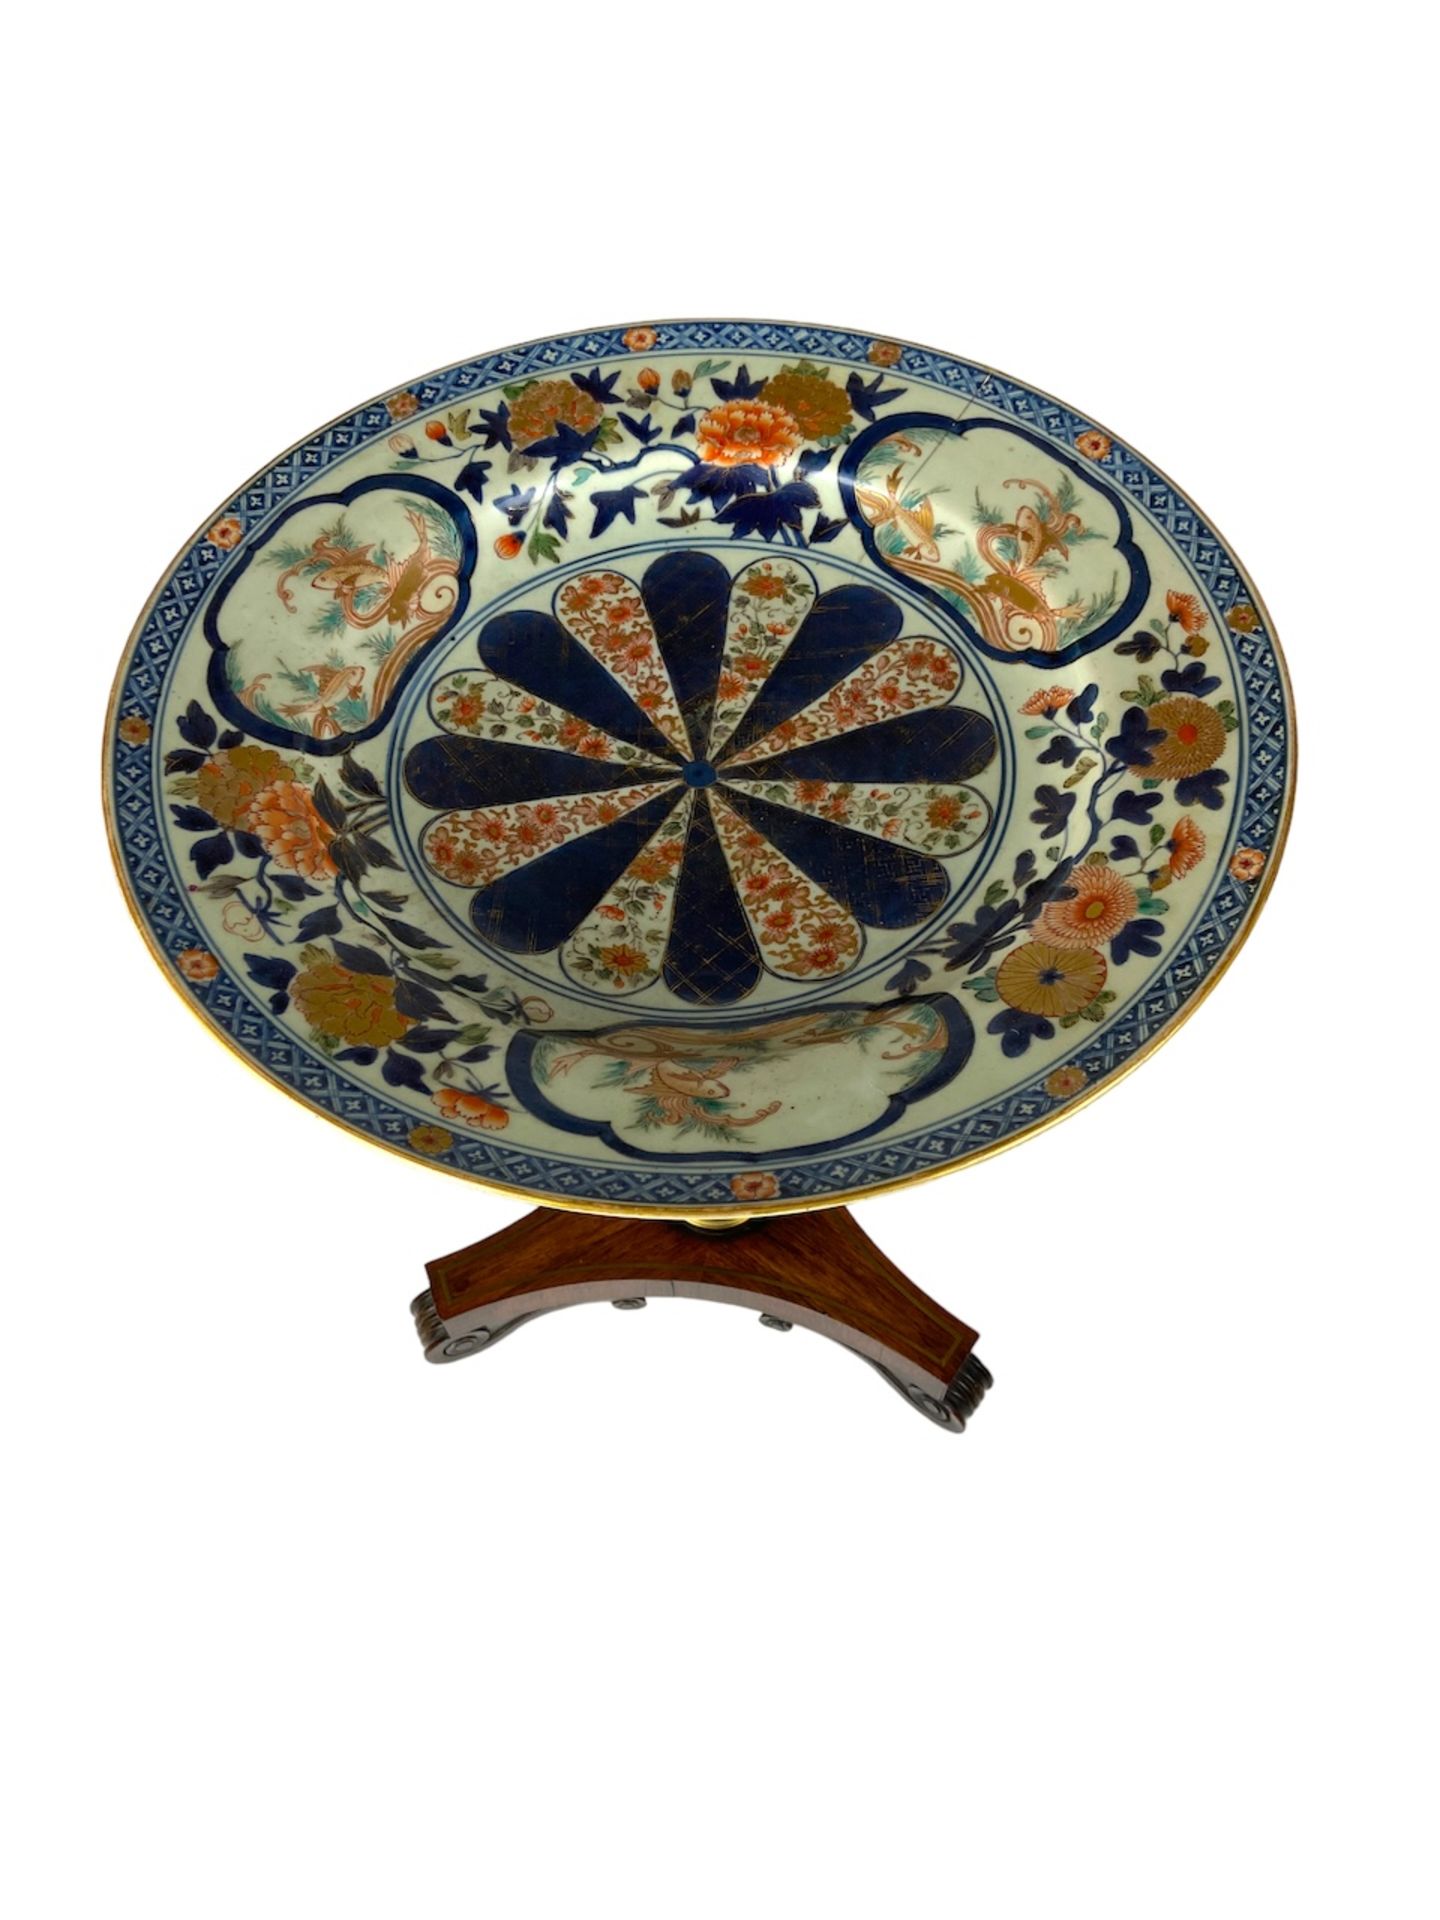 A Regency rosewood and gilt bronze mounted basin or jardiniere stand with and Edo period Imari dish - Image 8 of 8